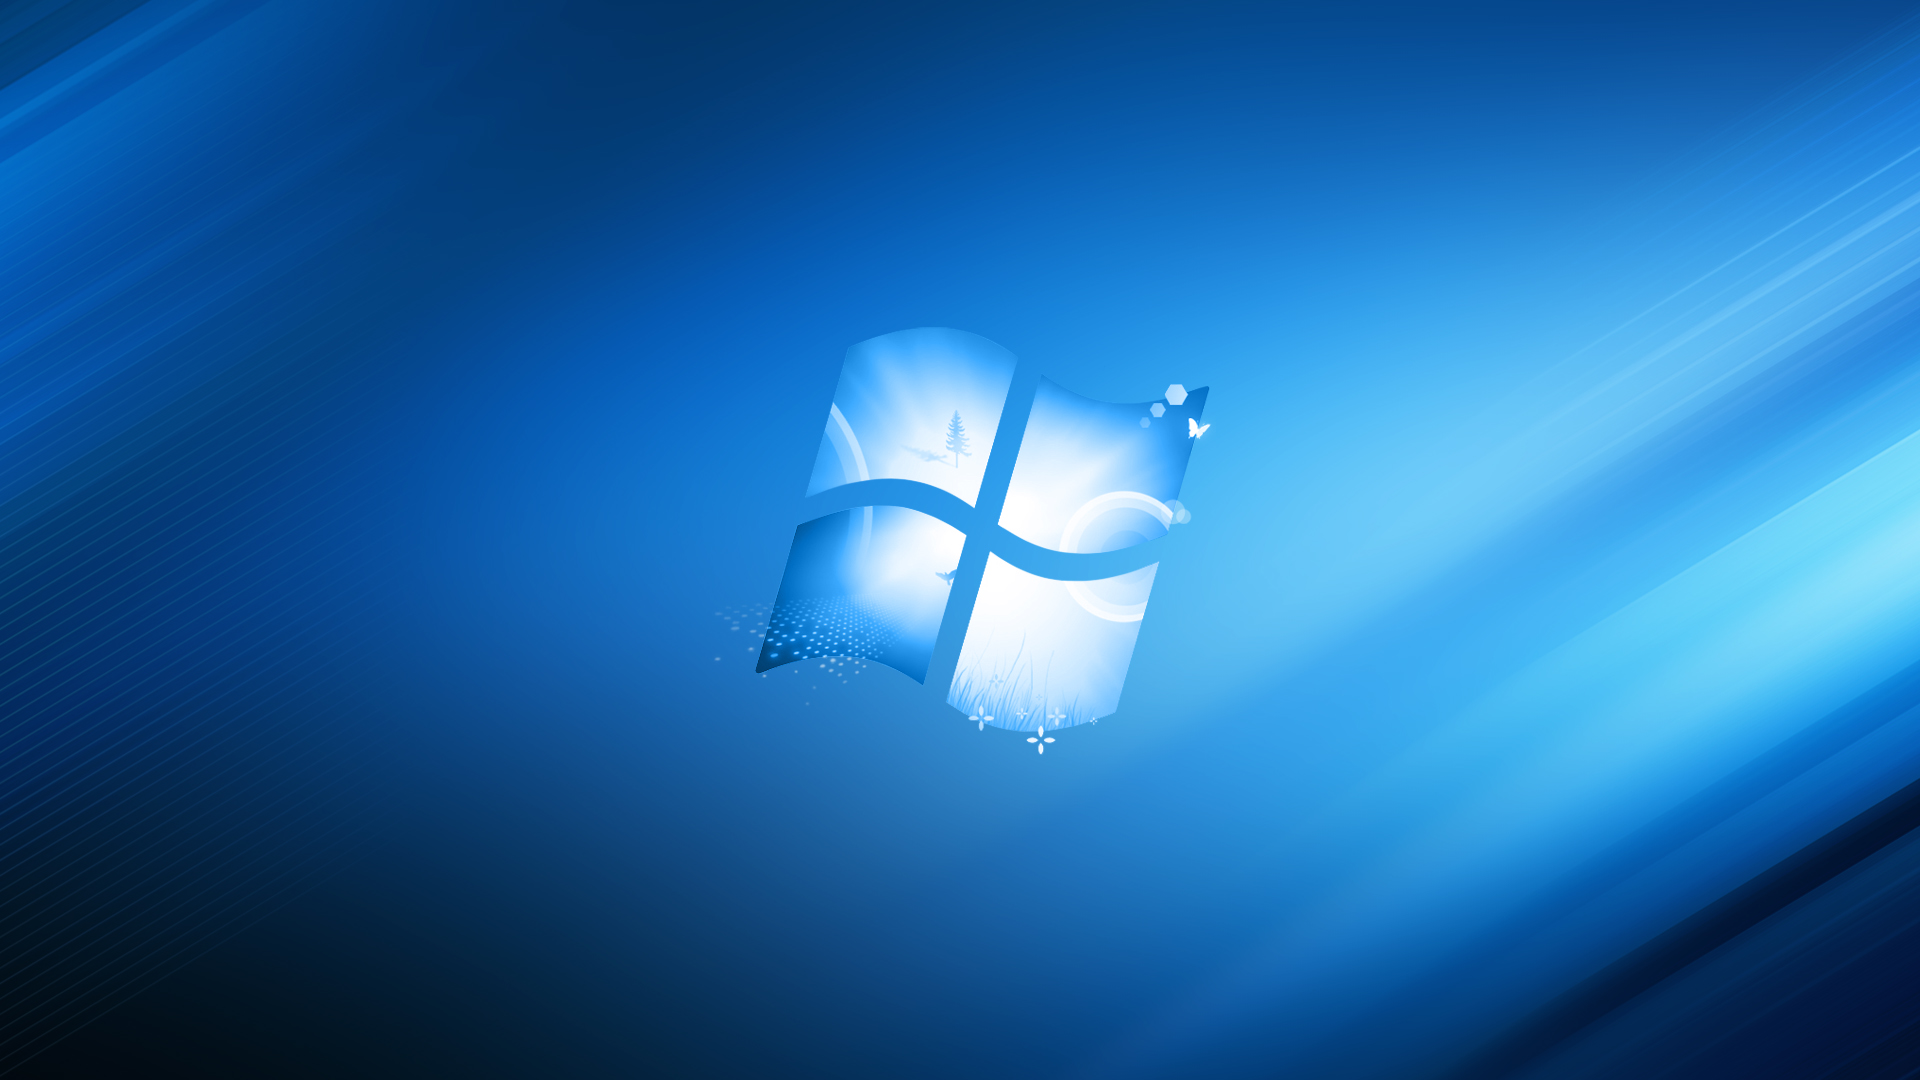 55 Windows 8 Wallpapers in HD For Free Download